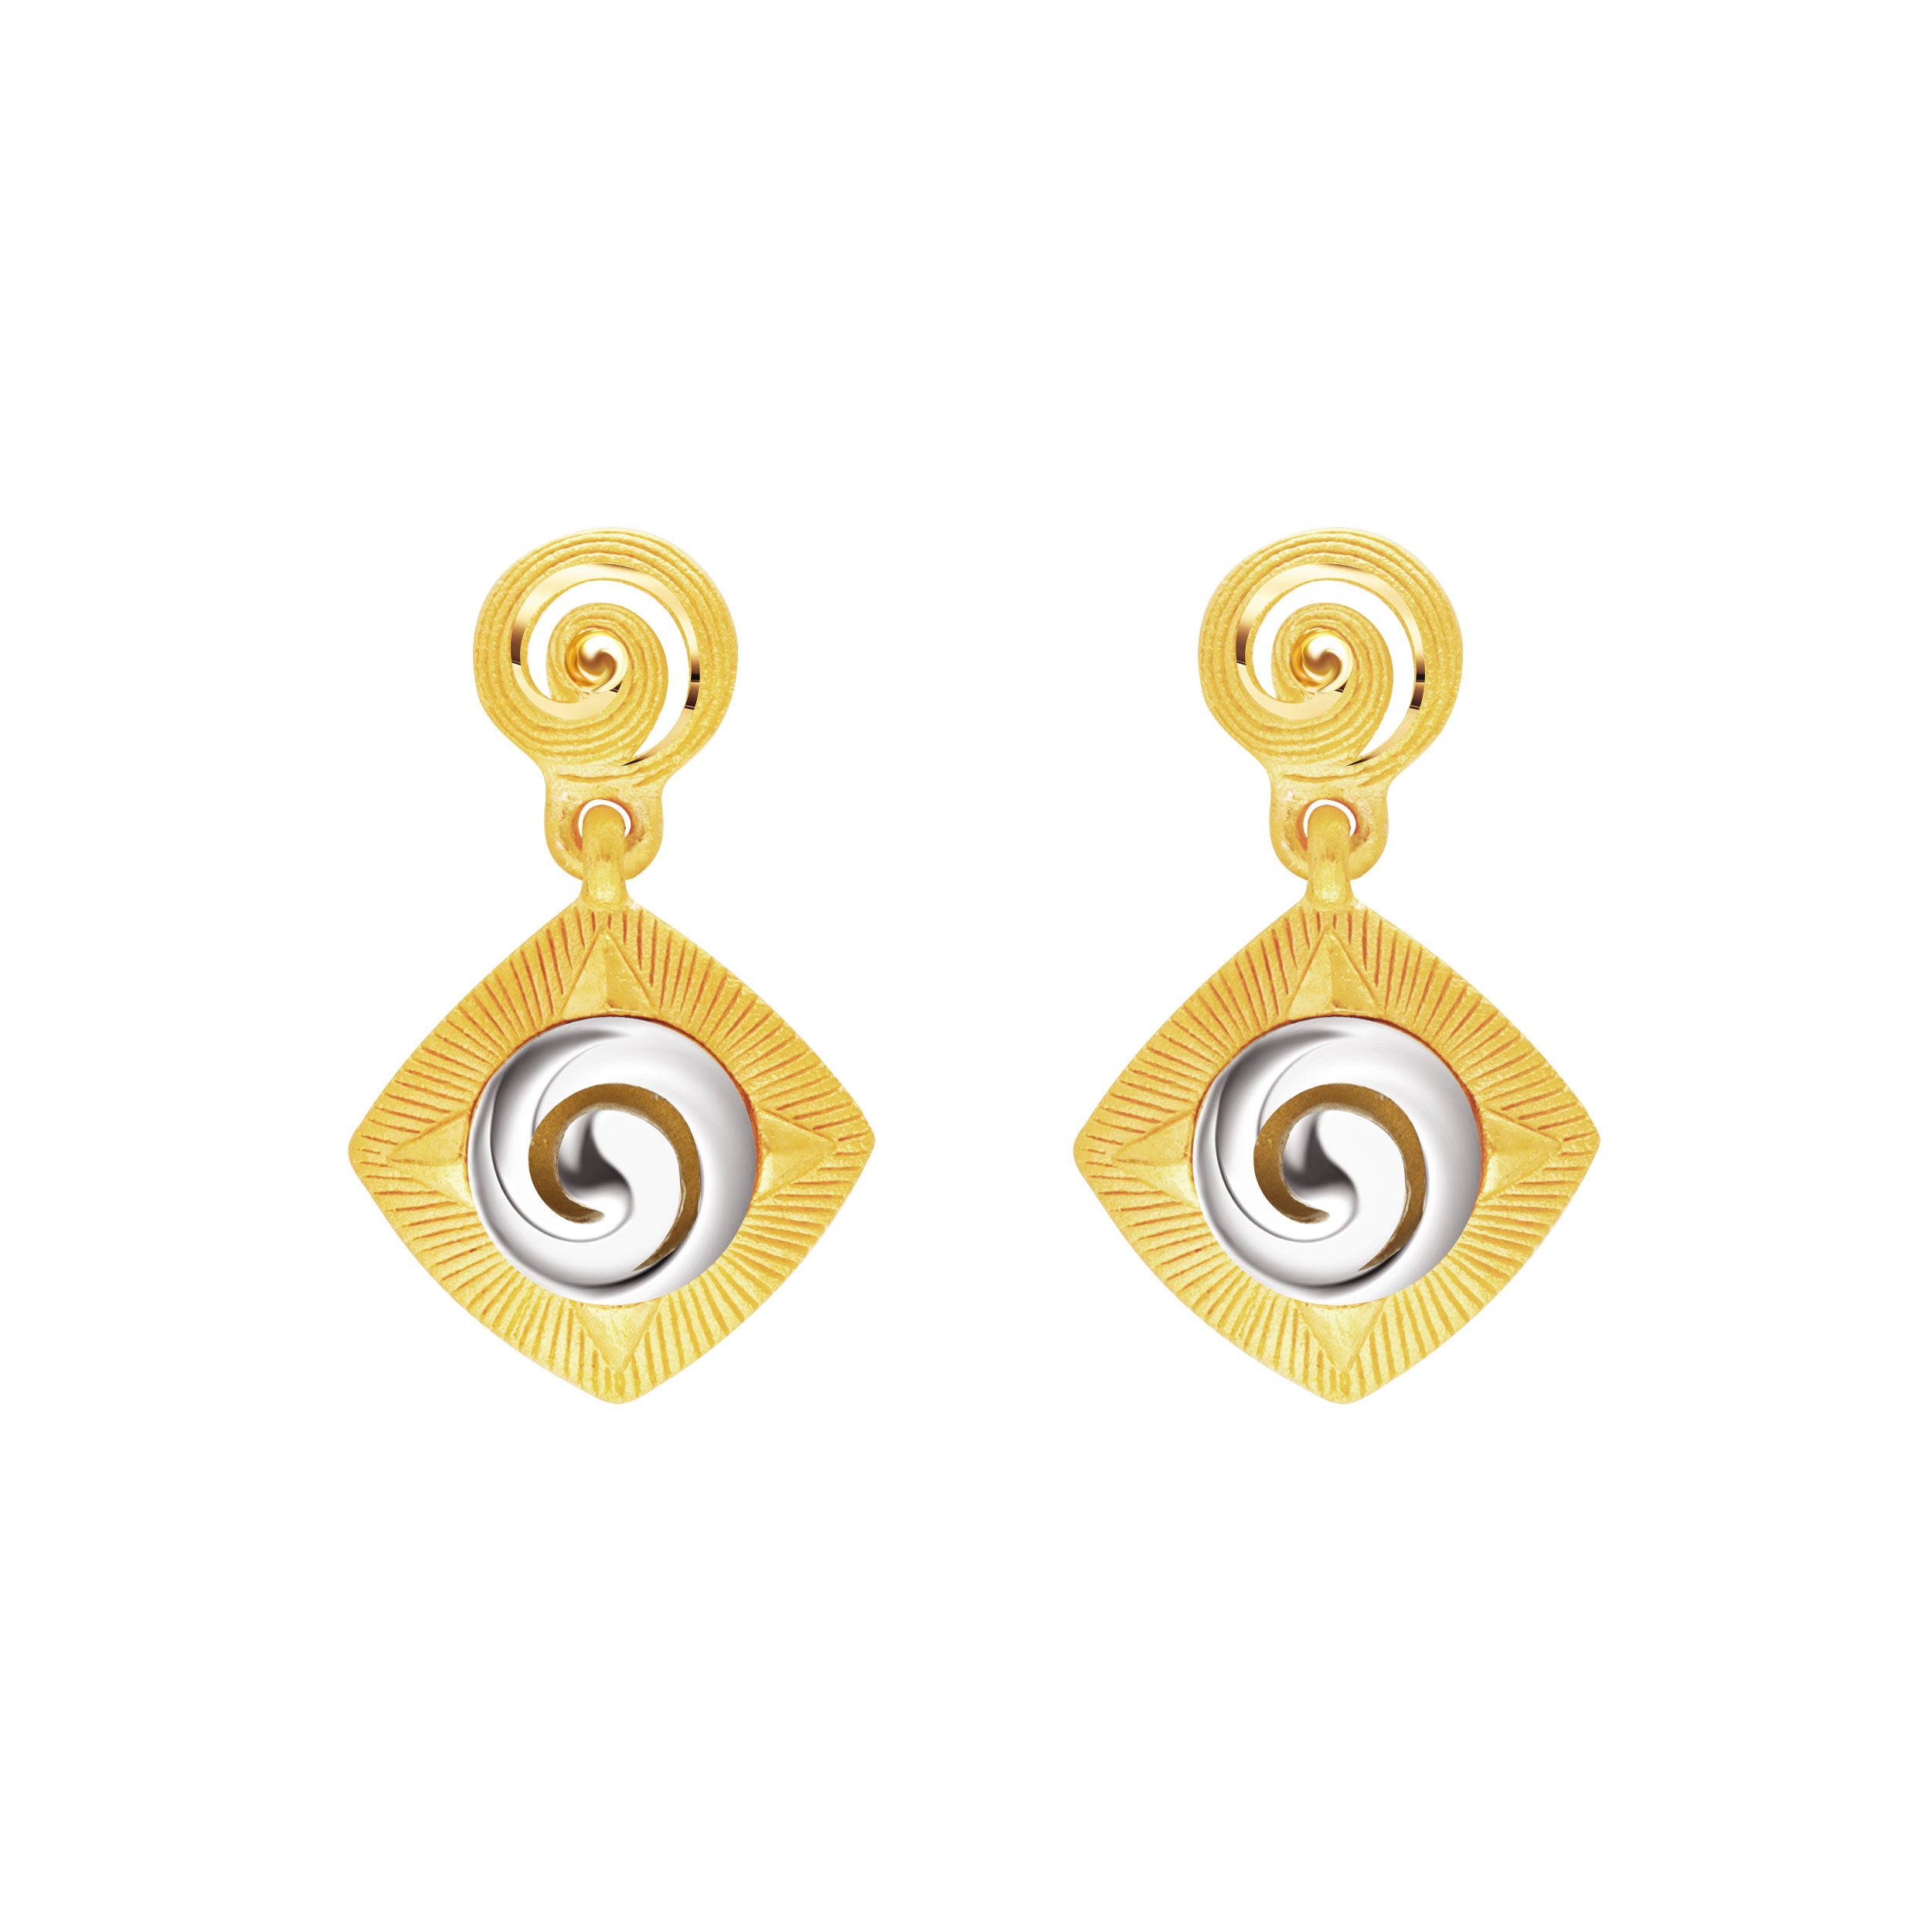 MIQIAO 18K Gold Earrings Pure AU750 Simplicity Fashion Fine Gold Stud  Earrings Gift For Women And Friends From Kang05, $33.34 | DHgate.Com